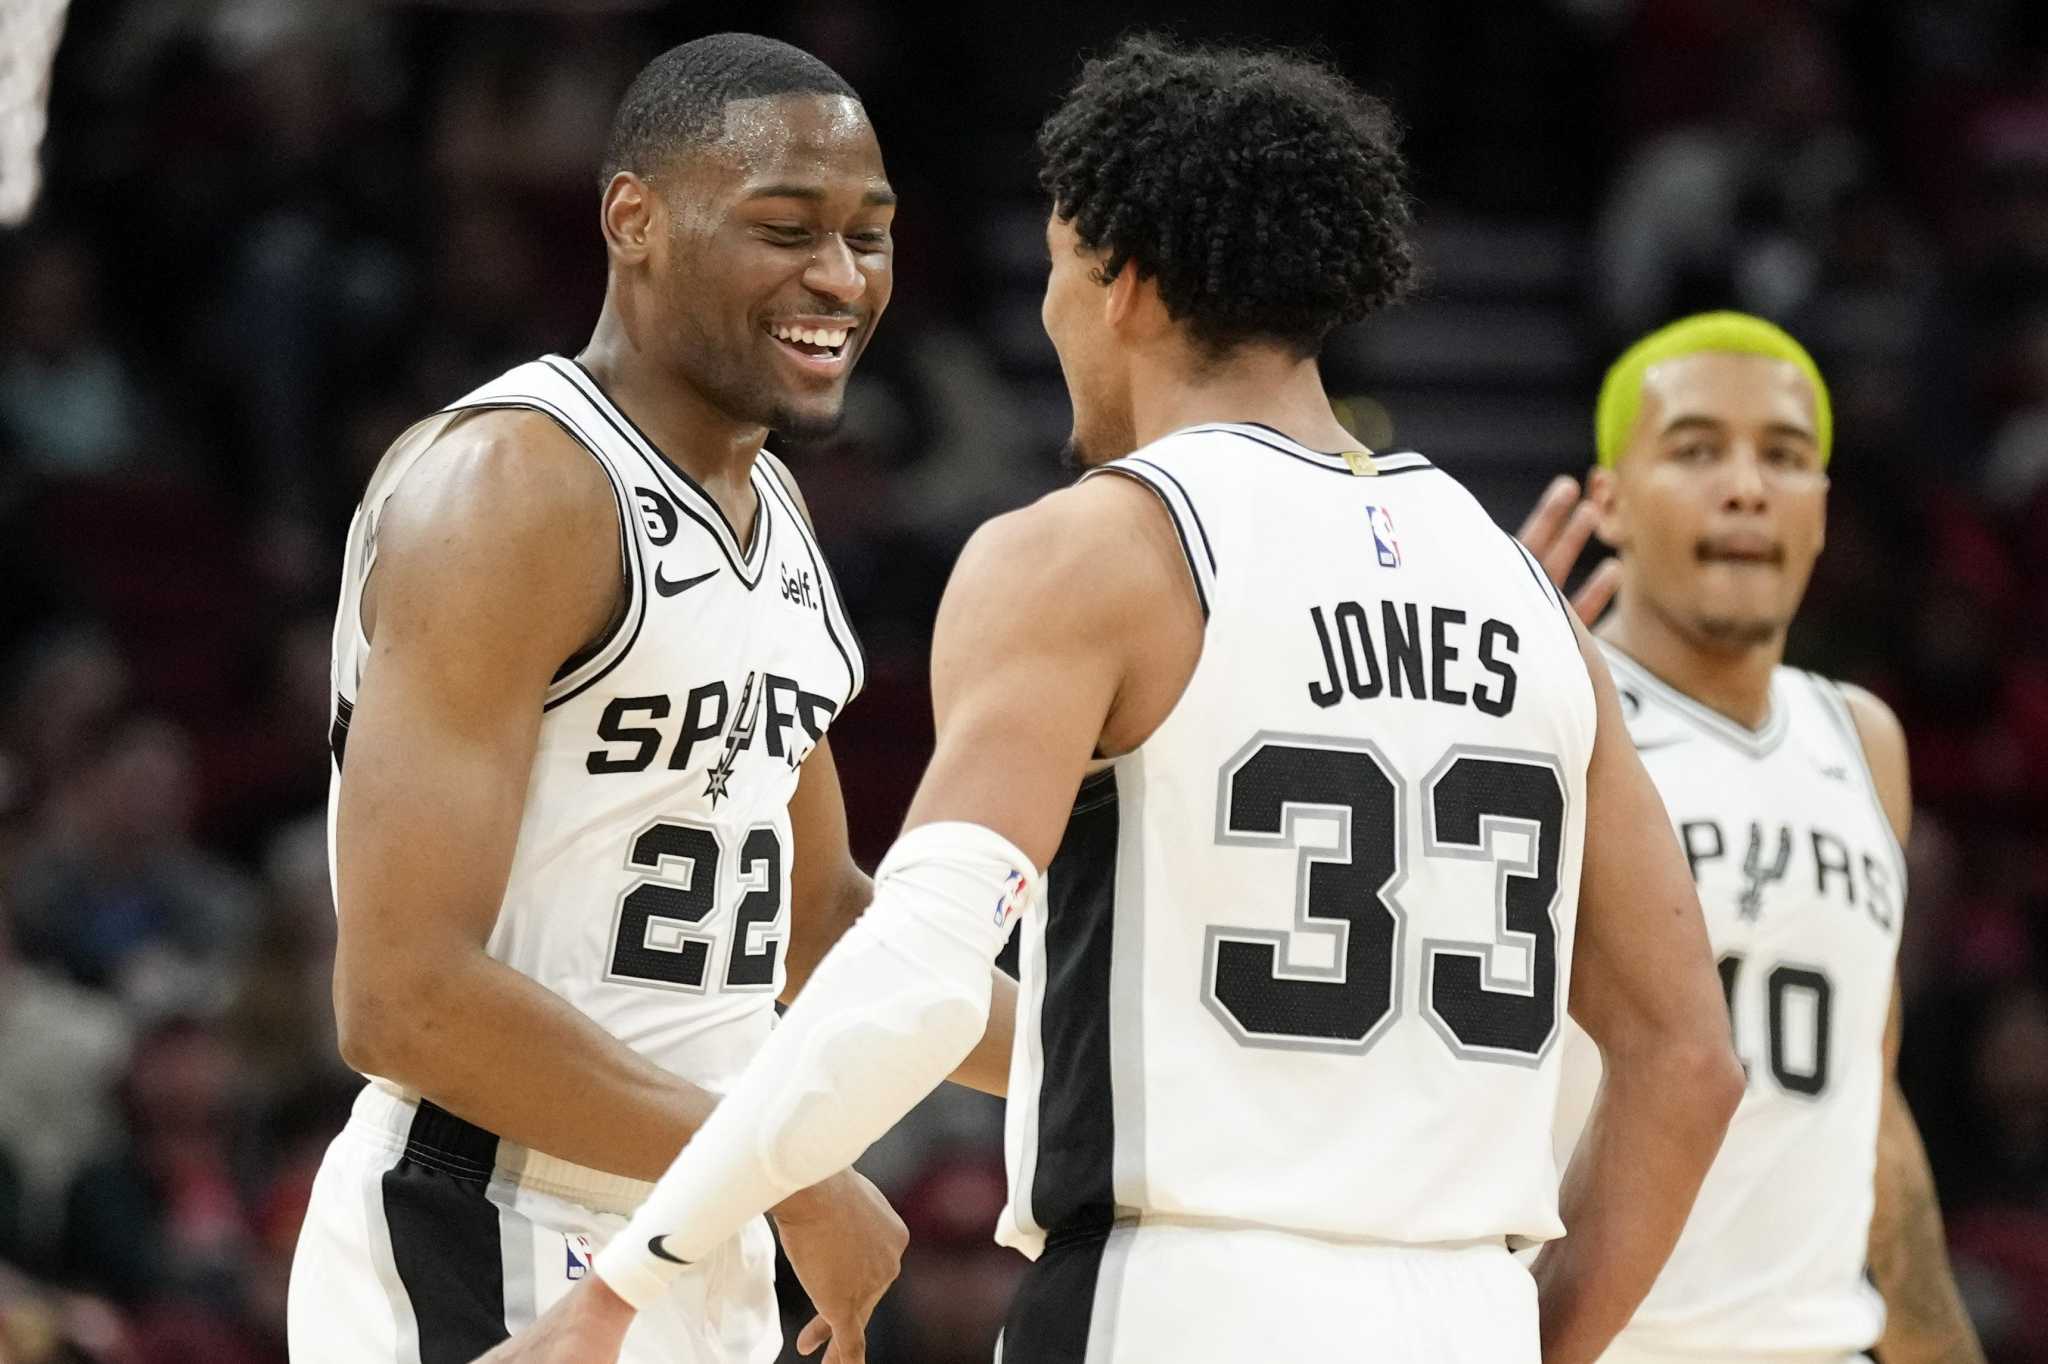 Get to know rookies, Spurs developmental process in new series